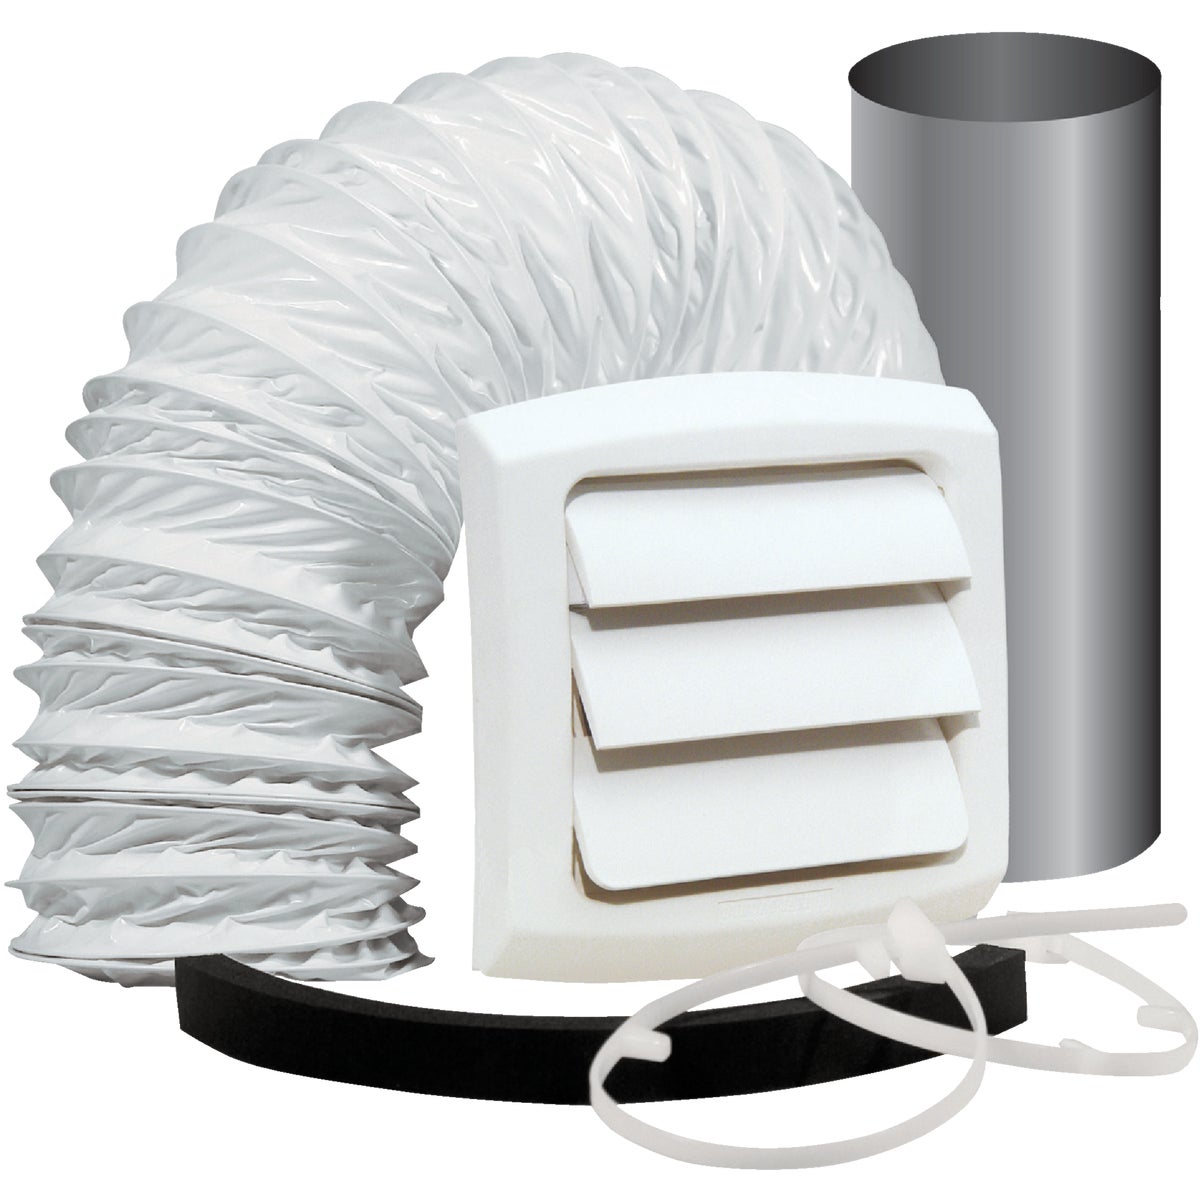 Item 266795, Bathroom fan and utility wall vent kit.